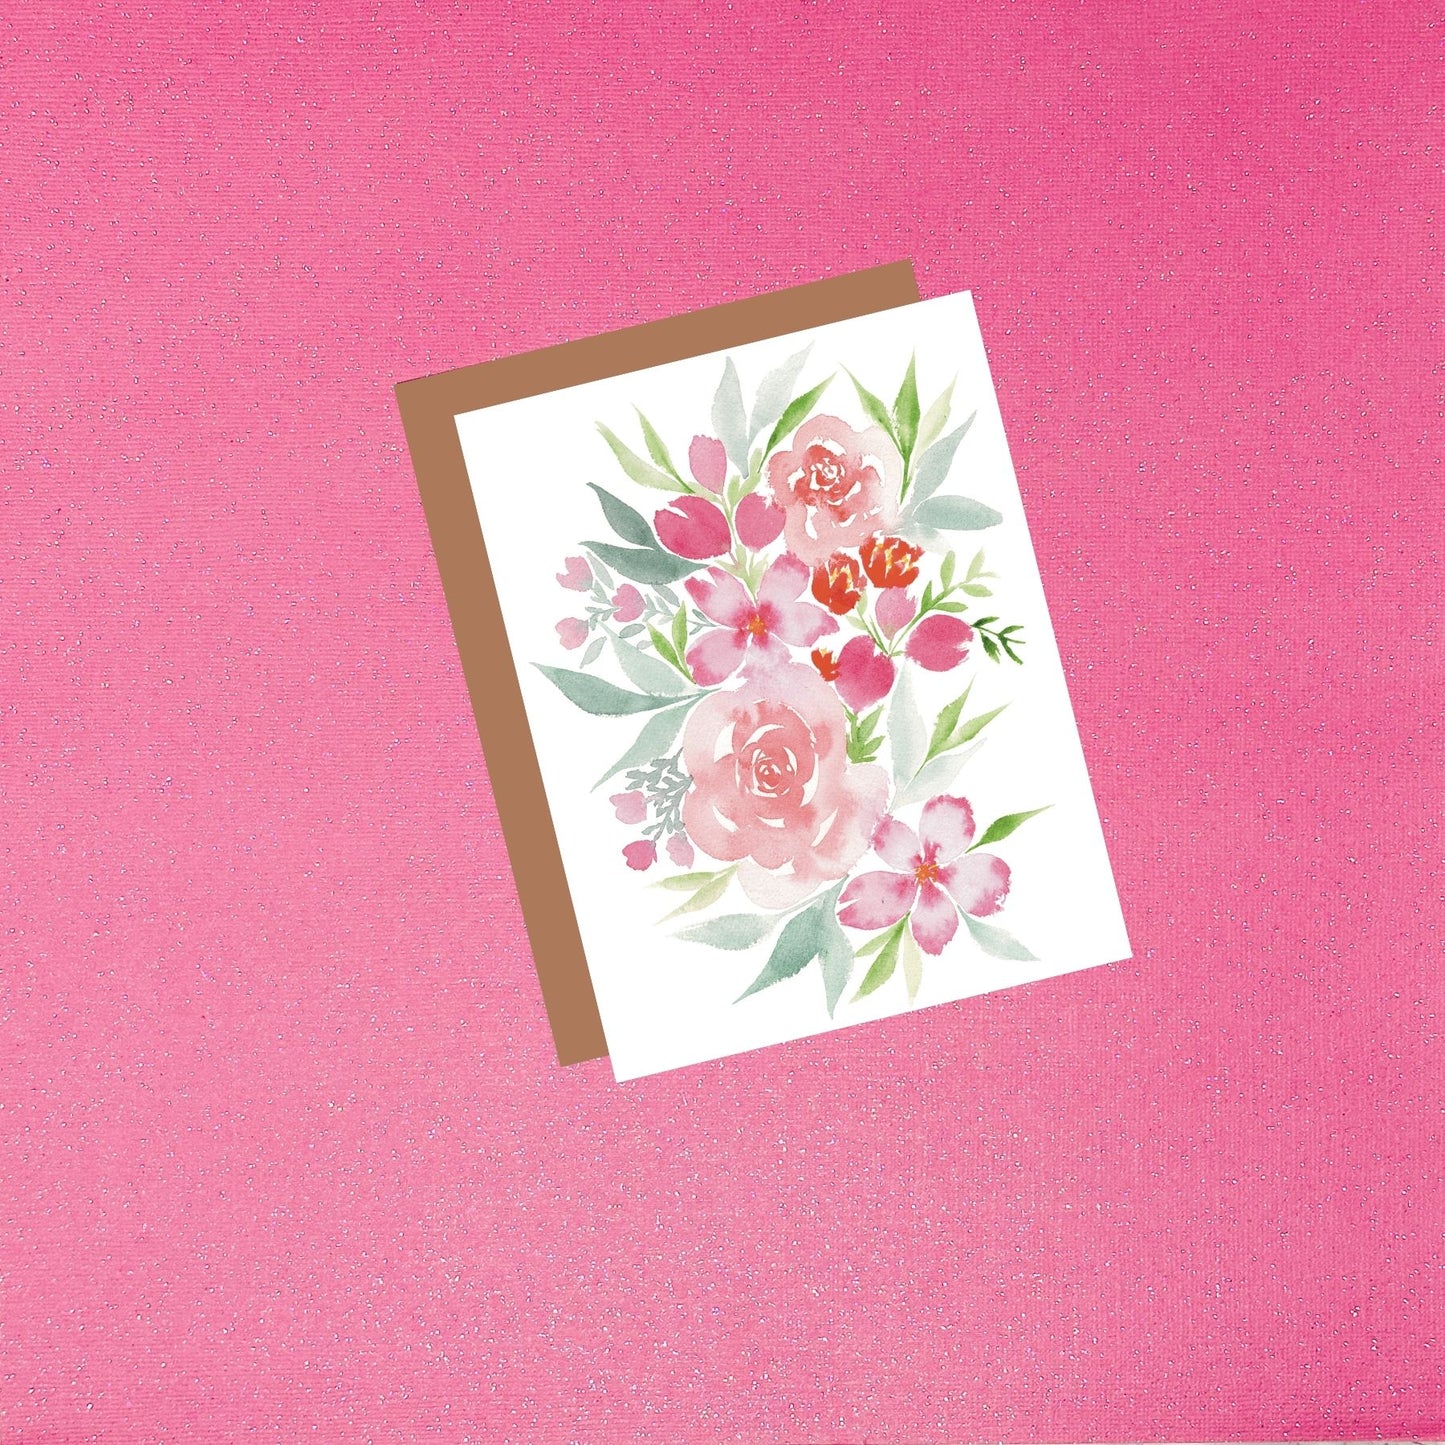 Watercolor Pink Floral Bouquet Greeting Card